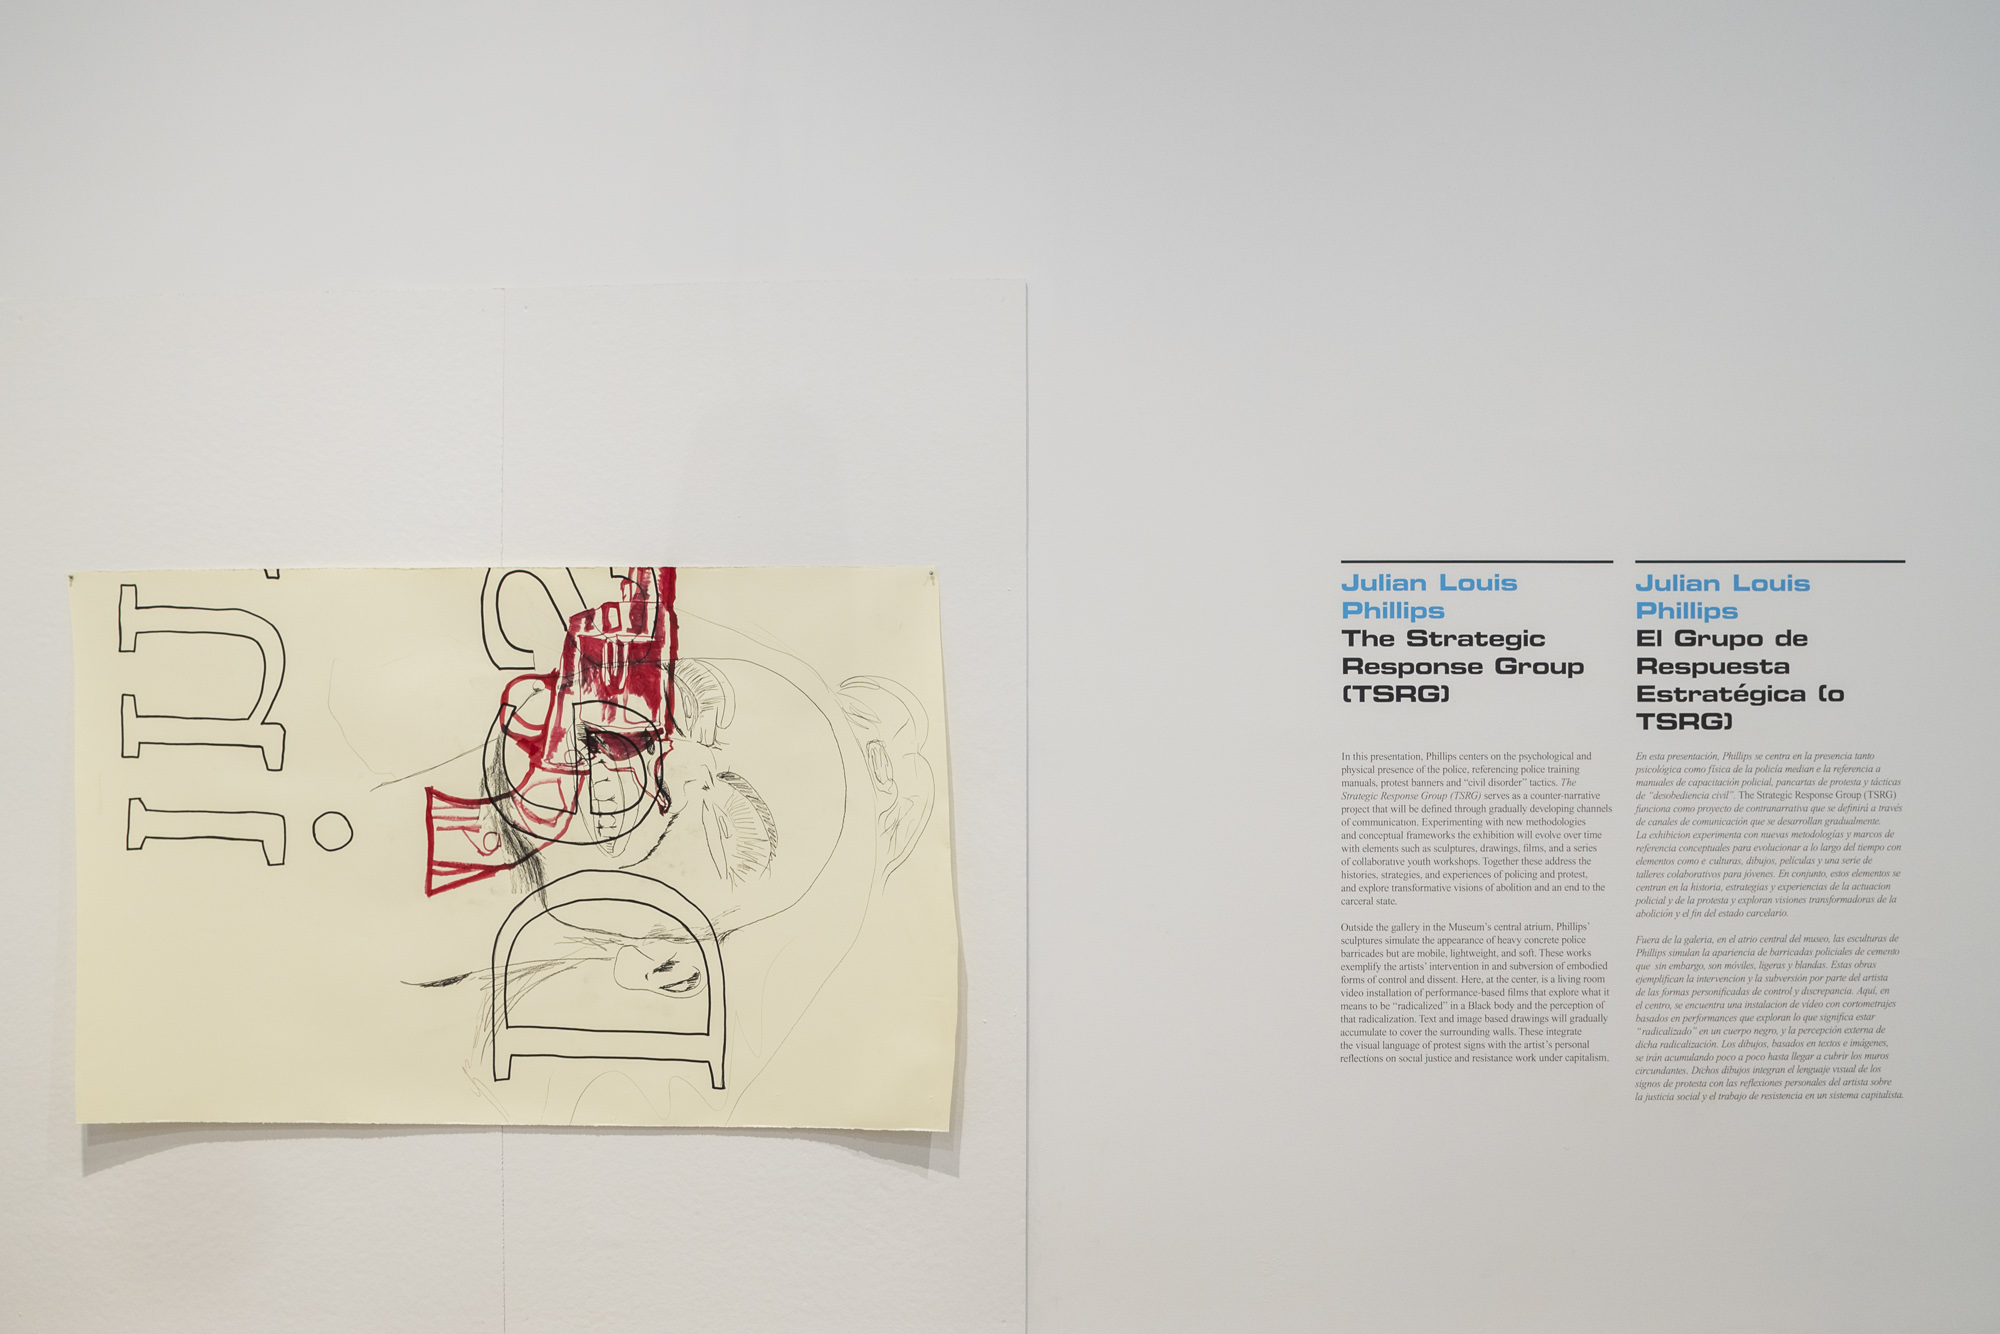 On the left, a drawing by Julian Louis Philips in mixed mediums is pinned to the wall horizontally. On the right, there is the gallery wall text reading the artist’s name Julian Louis Philips, the exhibition title The Strategic Response Group, and information describing the exhibition and the artist’s work.